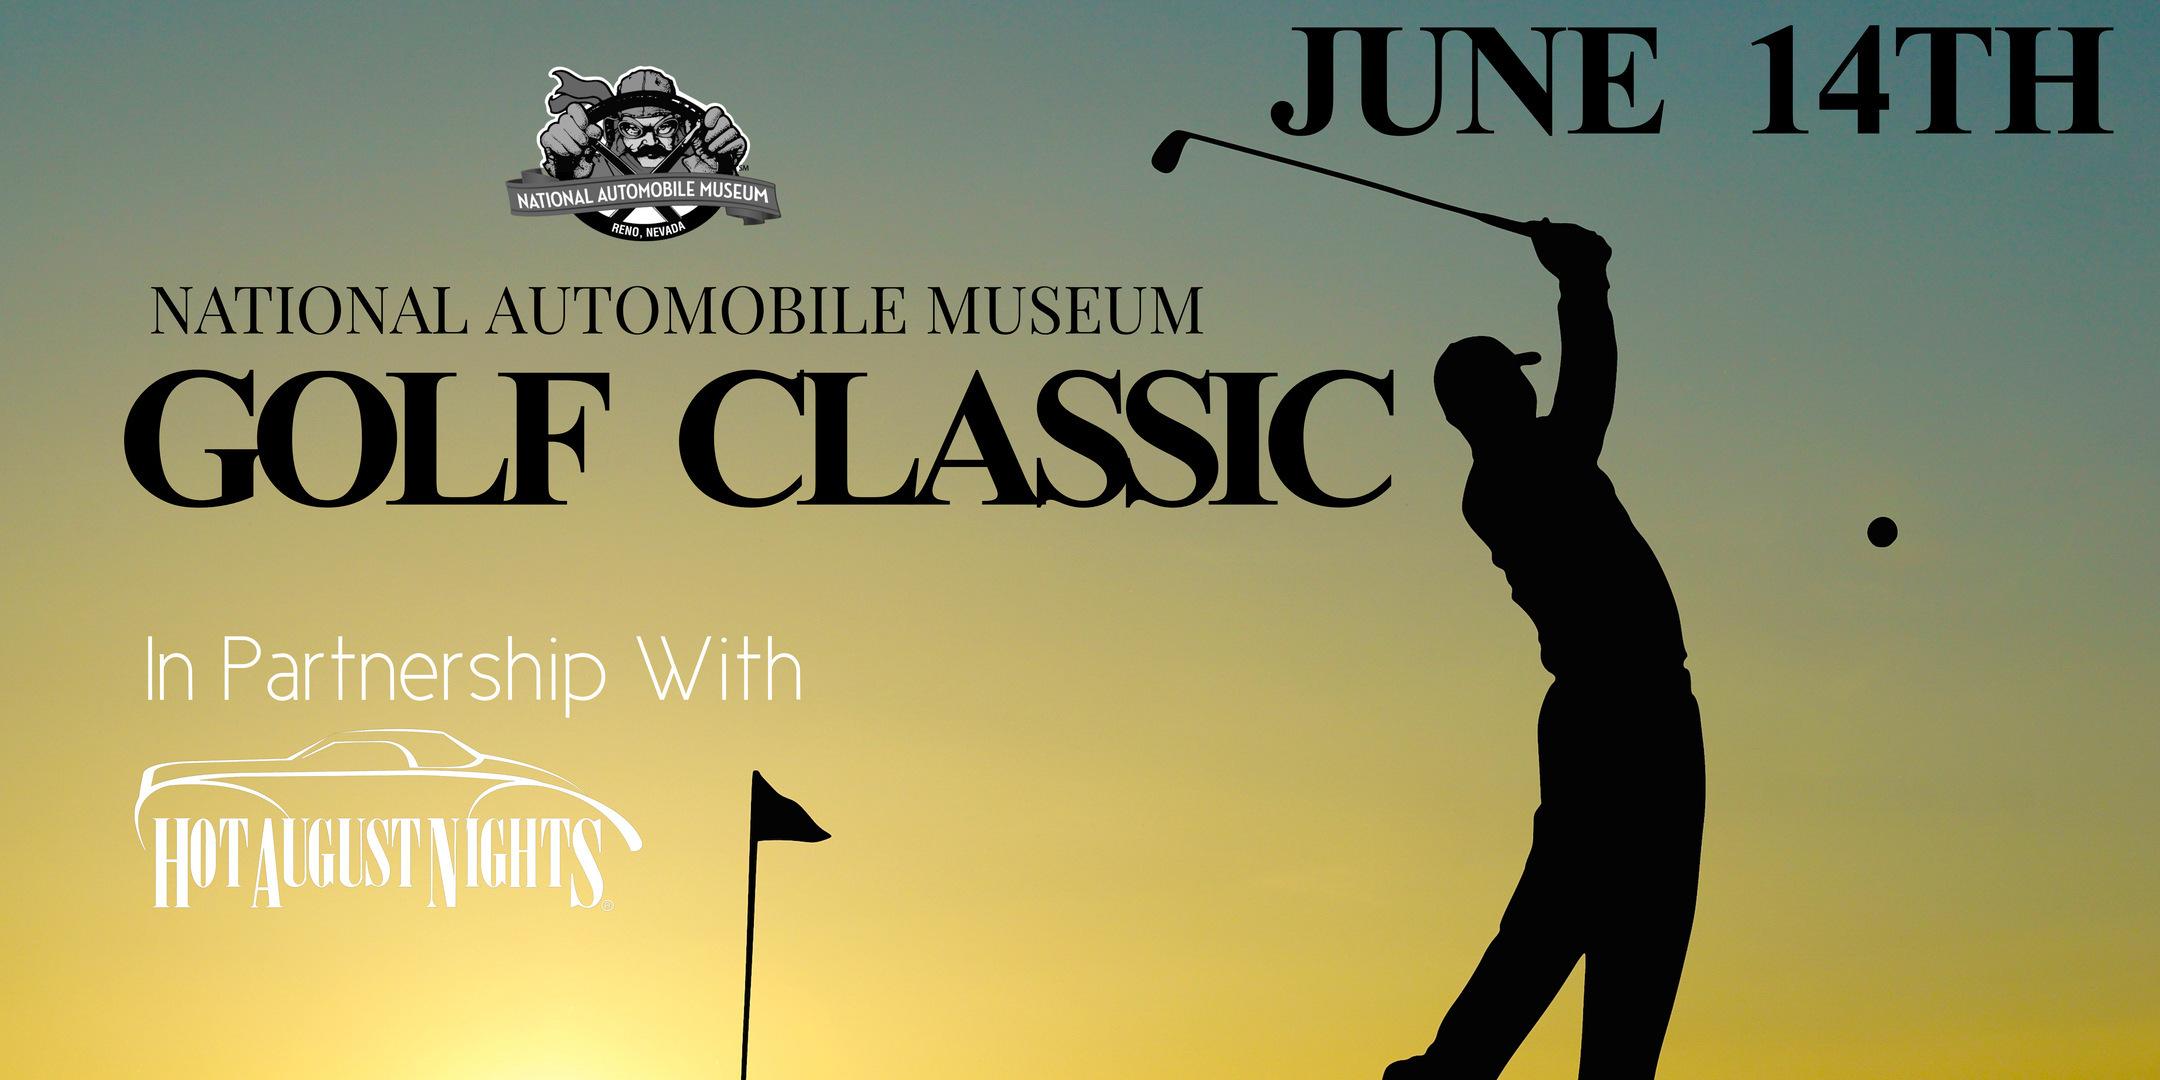 1st Annual National Automobile Museum Golf Classic